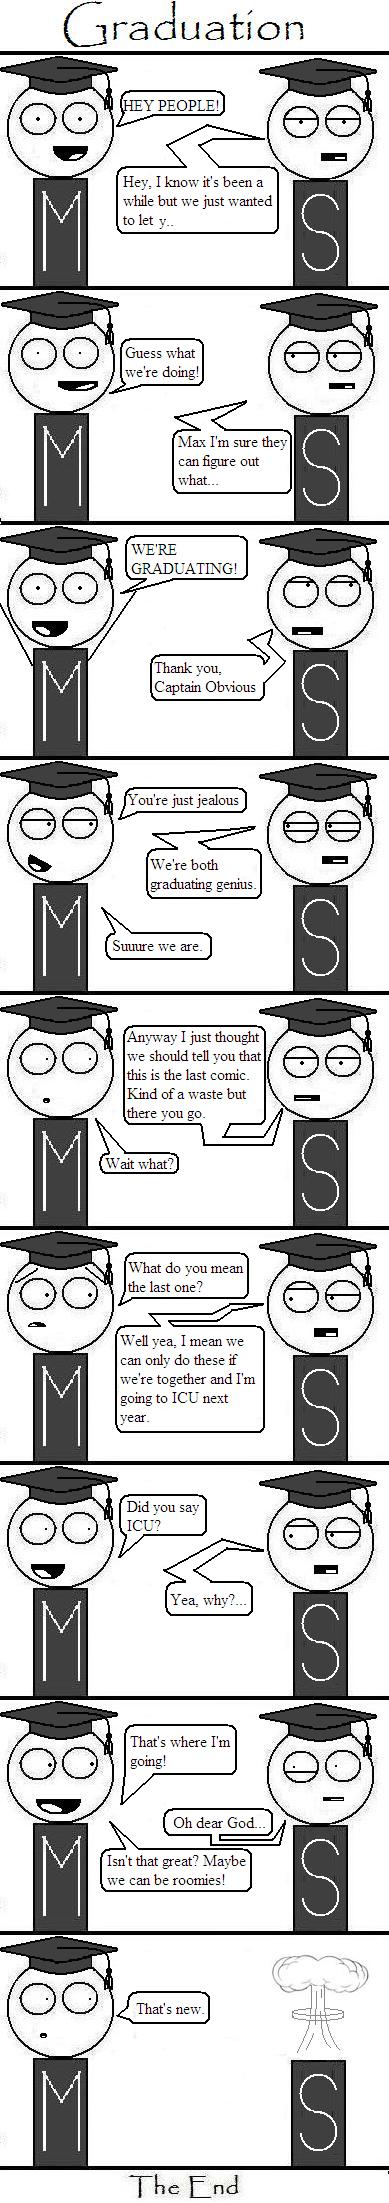 Everyday Annoyances With Max and Sam: Episode 12 - Graduation by bookworm369